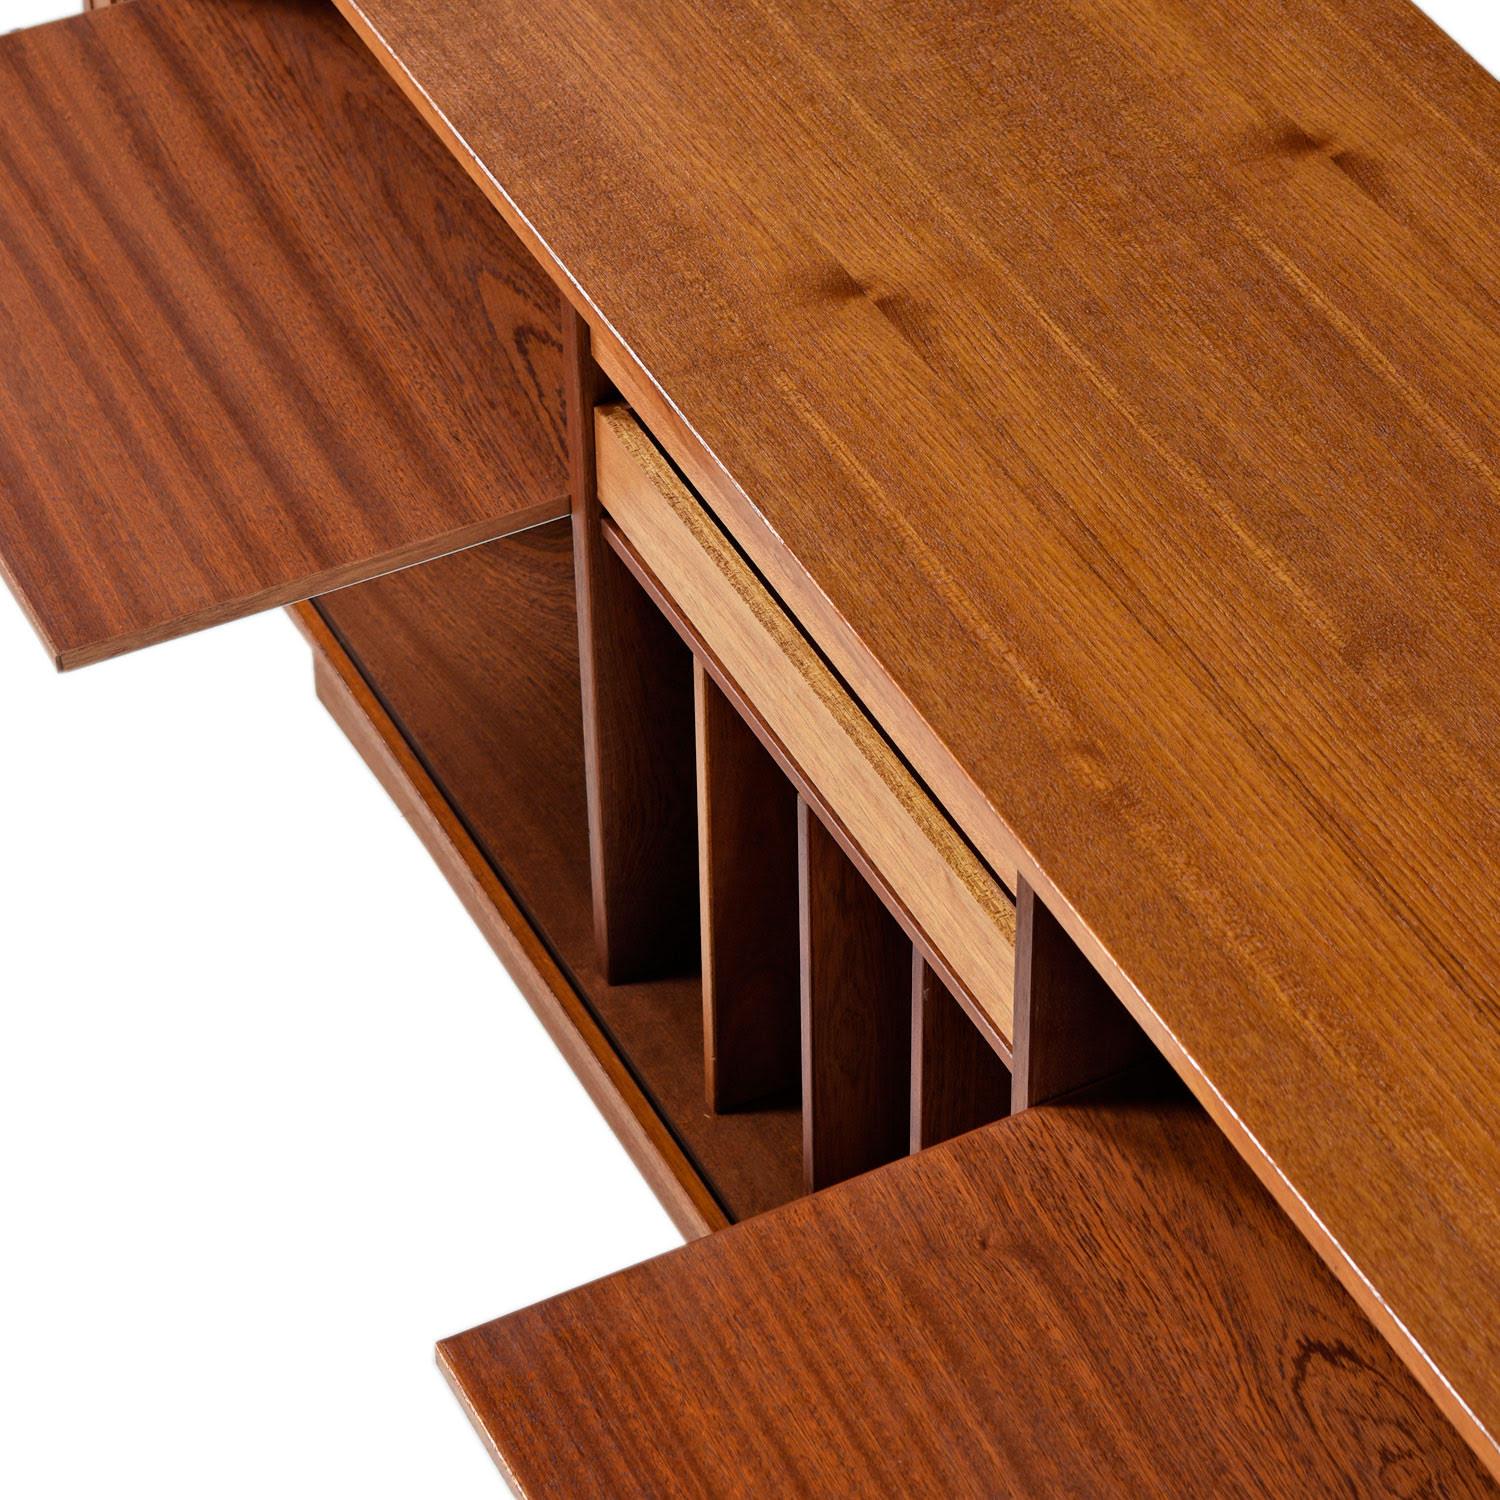 Concealing storage is a breeze with this versatile teak credenza. If you are looking for a media console, this is what you've been waiting for! We do not often come across credenza's that are configured for electronics. Most of our clients tend to